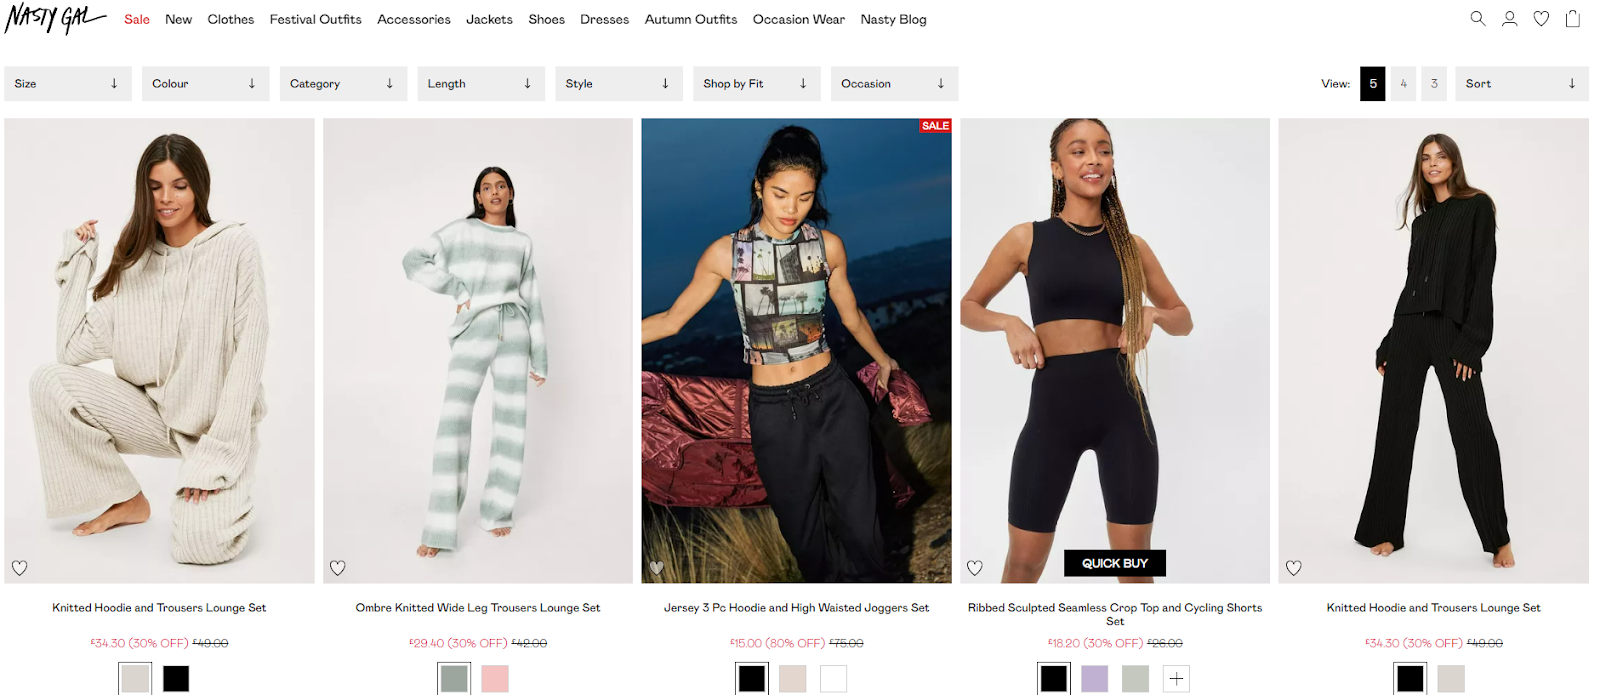 Why You Should Buy Clothing at Nastygal - Cloud Retouch